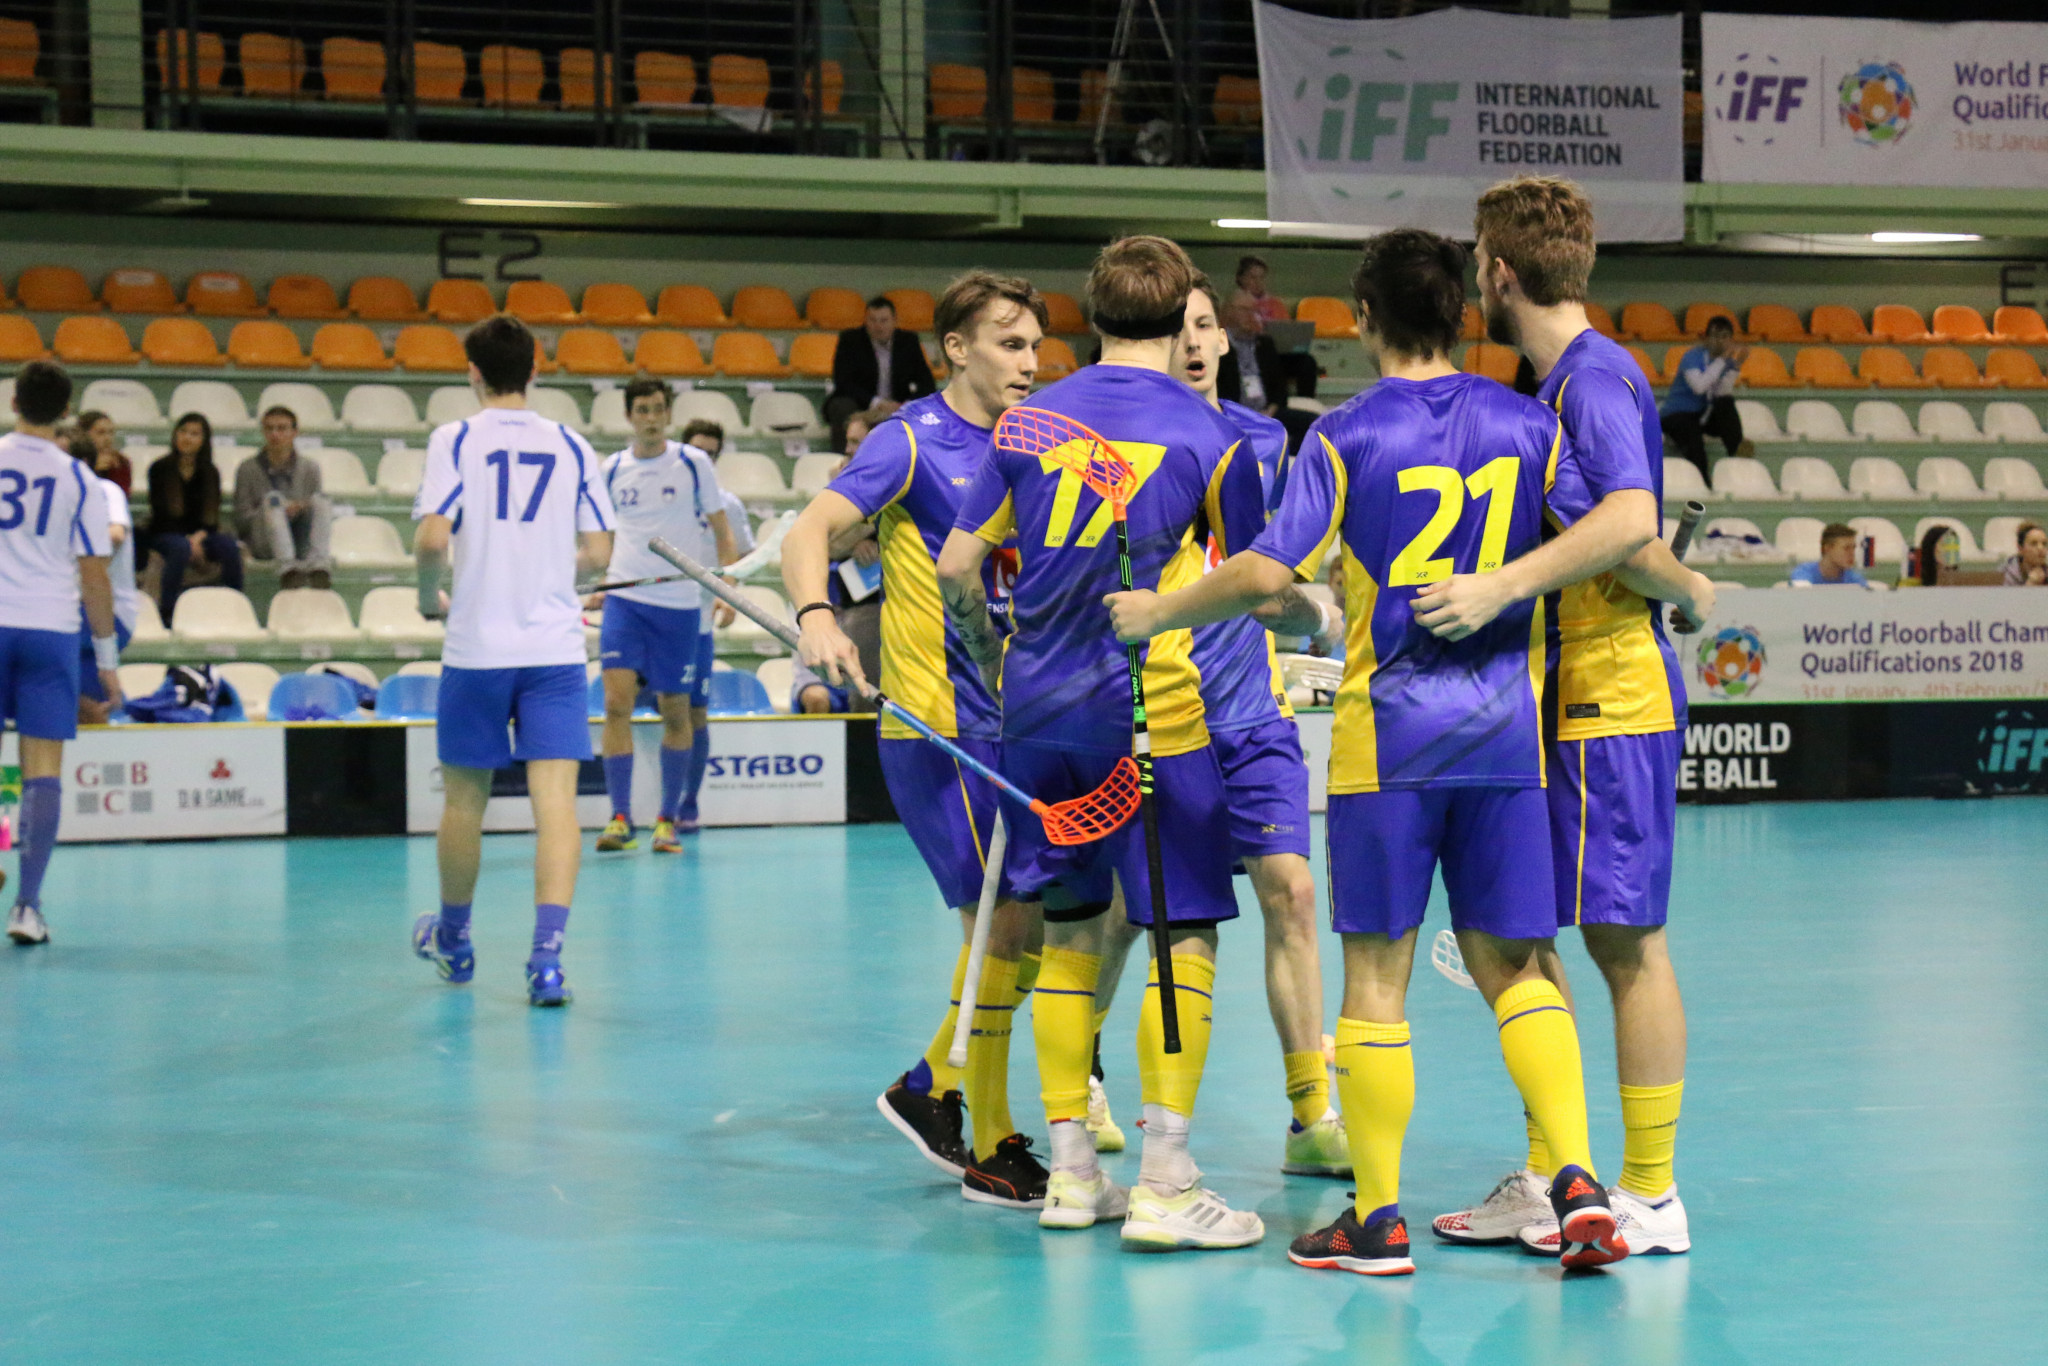 Sweden confirmed their place at the top of Group Two ©IFF/Flickr